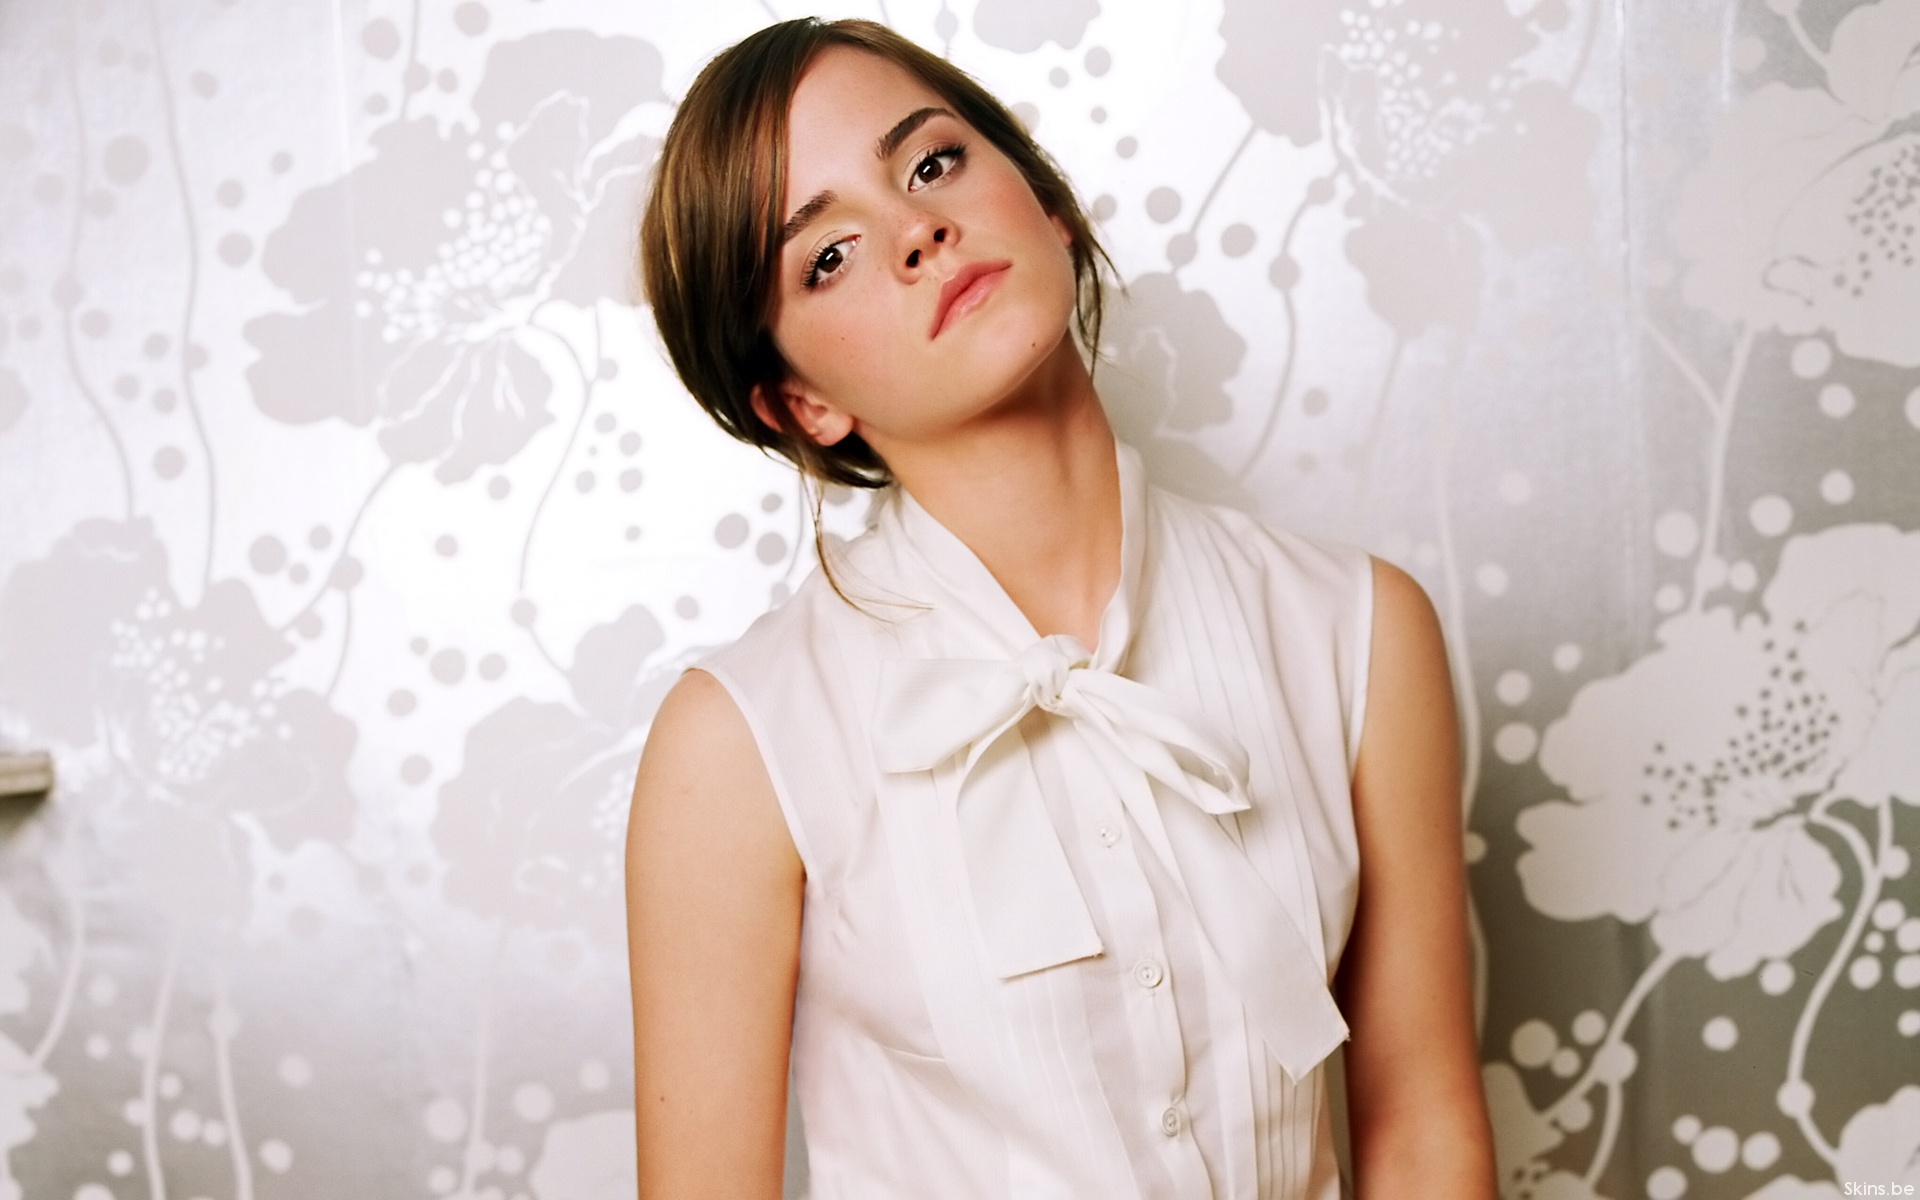 Emma Watson Rare Pic Wallpaper Hd Celebrities 4k Wallpapers Images Photos And Background